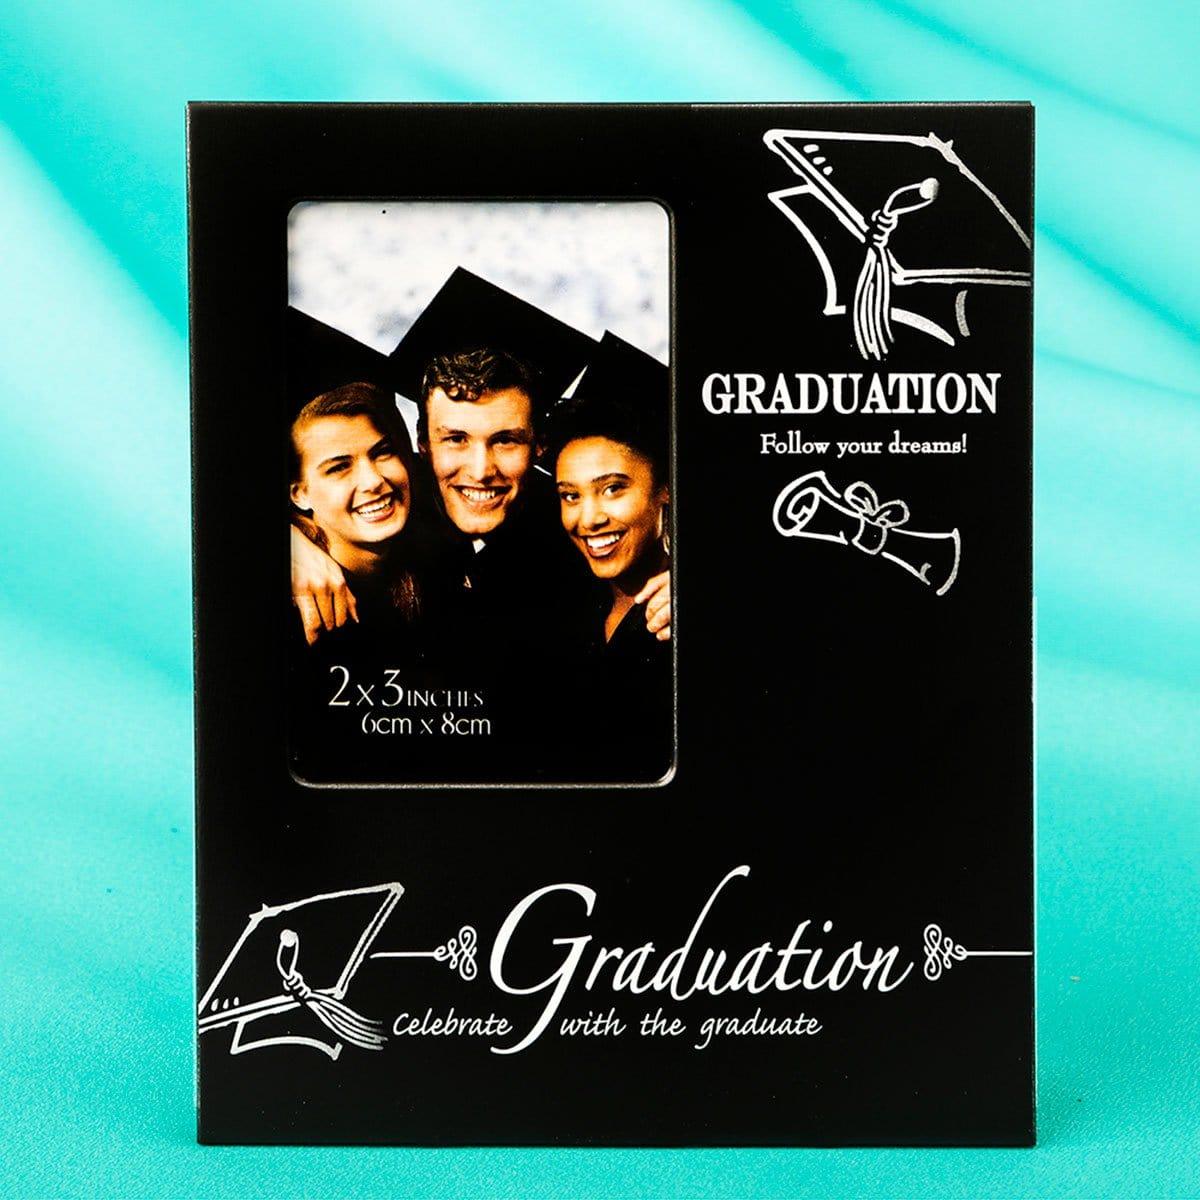 Buy Graduation Graduation Frame 2 X 3 In. - Black/silver sold at Party Expert